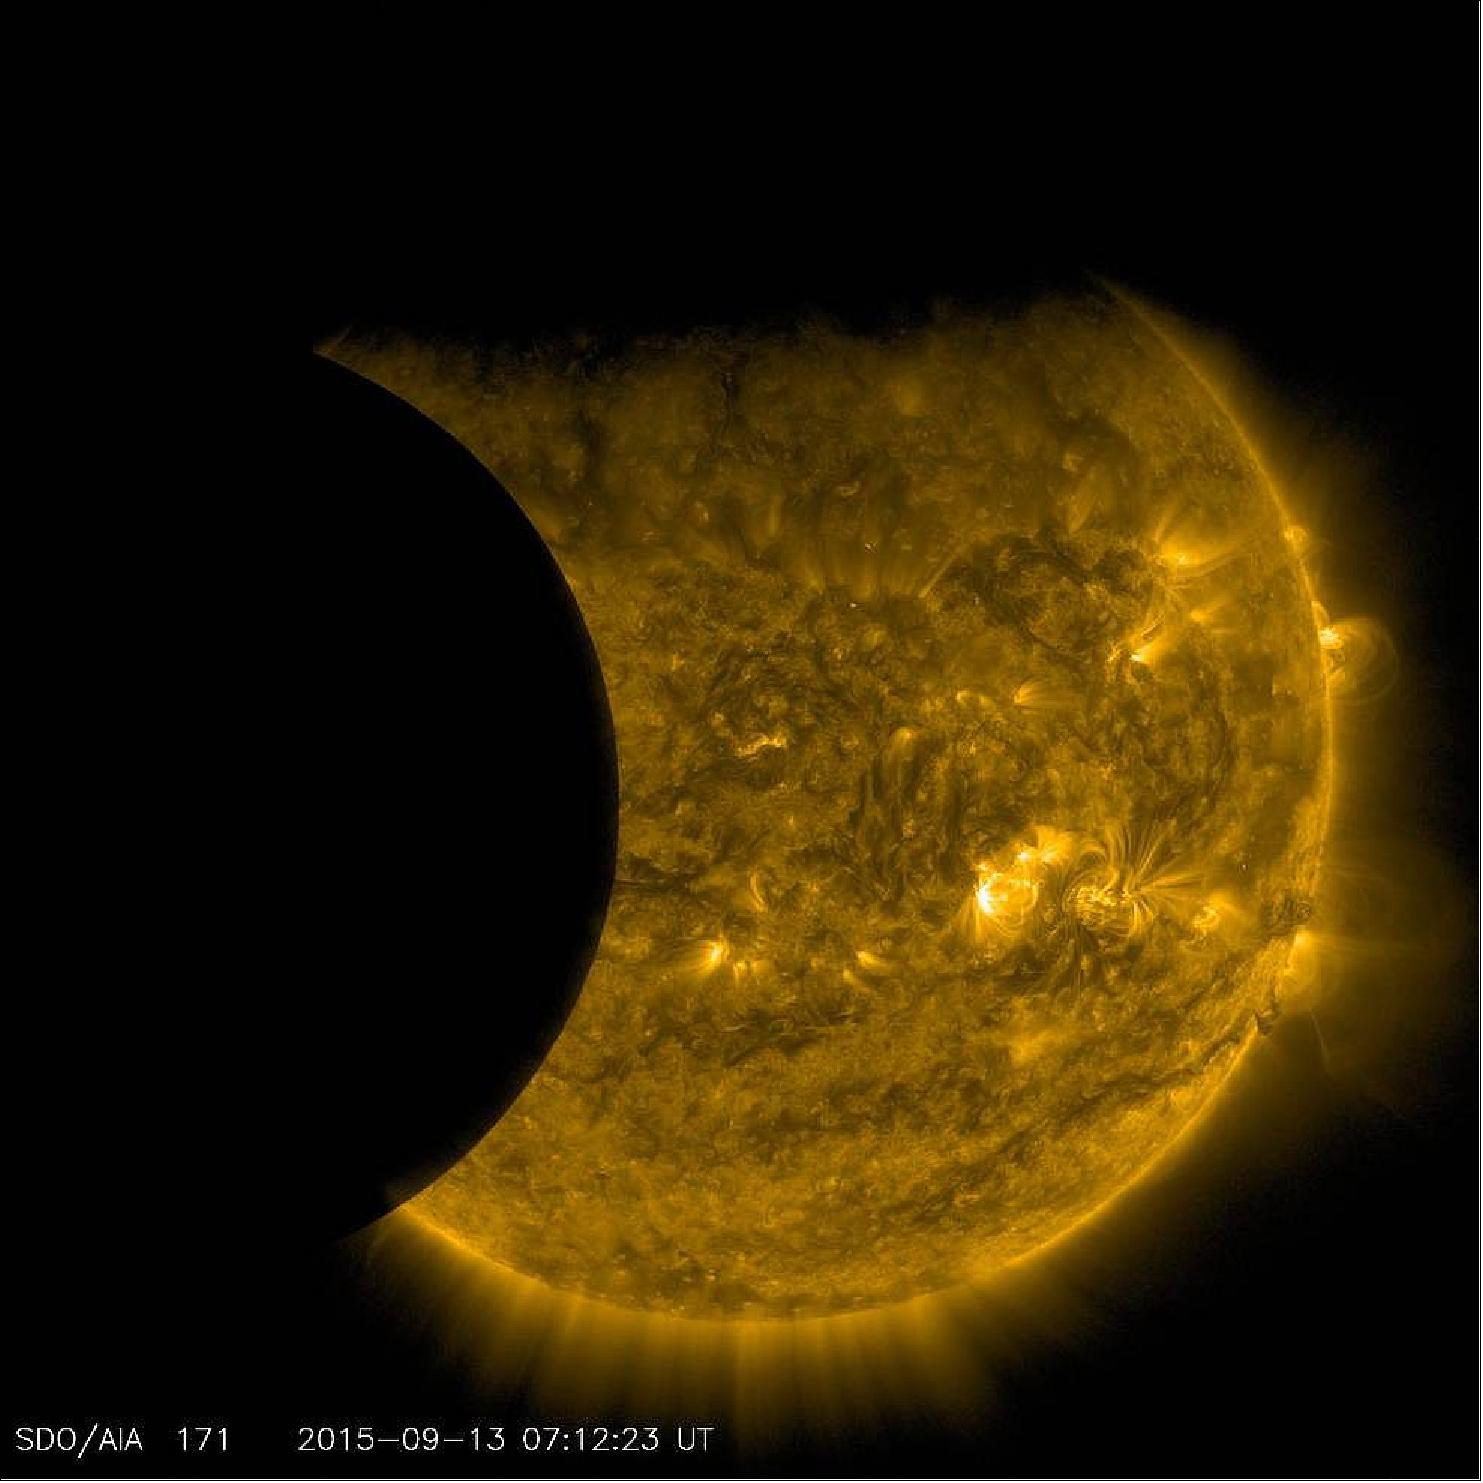 Figure 18: SDO captured this image of Earth and the moon transiting the sun together on Sept. 13, 2015. The edge of Earth, visible near the top of the frame, appears fuzzy because Earth’s atmosphere blocks different amounts of light at different altitudes. On the left, the moon’s edge is perfectly crisp, because it has no atmosphere. This image was taken in extreme ultraviolet wavelengths of 171Å. Though this light is invisible to our eyes, it is typically colorized in gold (image credit: NASA, SDO)